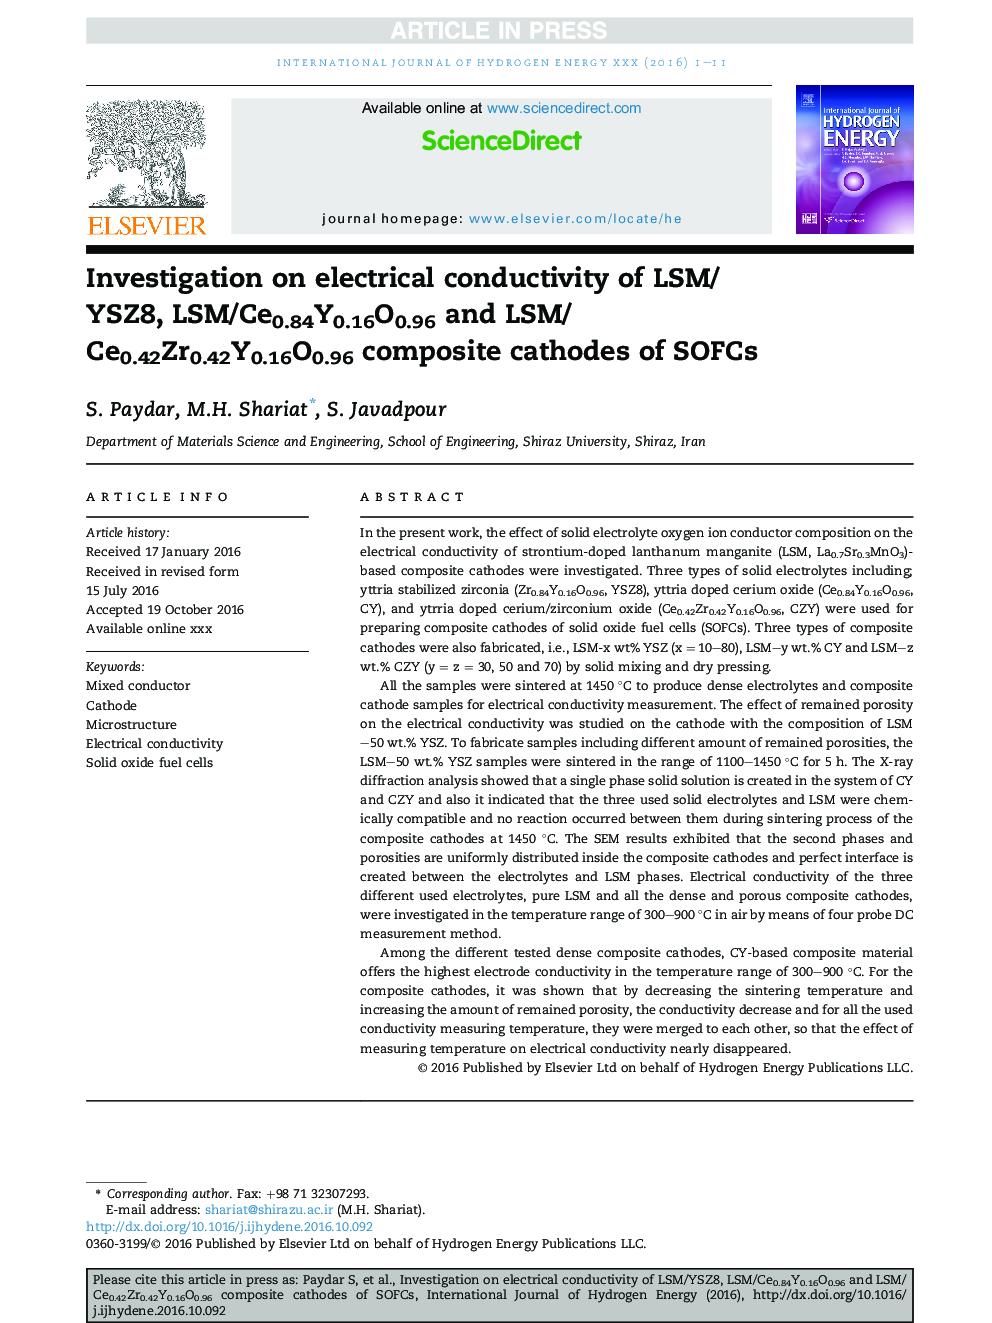 Investigation on electrical conductivity of LSM/YSZ8, LSM/Ce0.84Y0.16O0.96 and LSM/Ce0.42Zr0.42Y0.16O0.96 composite cathodes of SOFCs